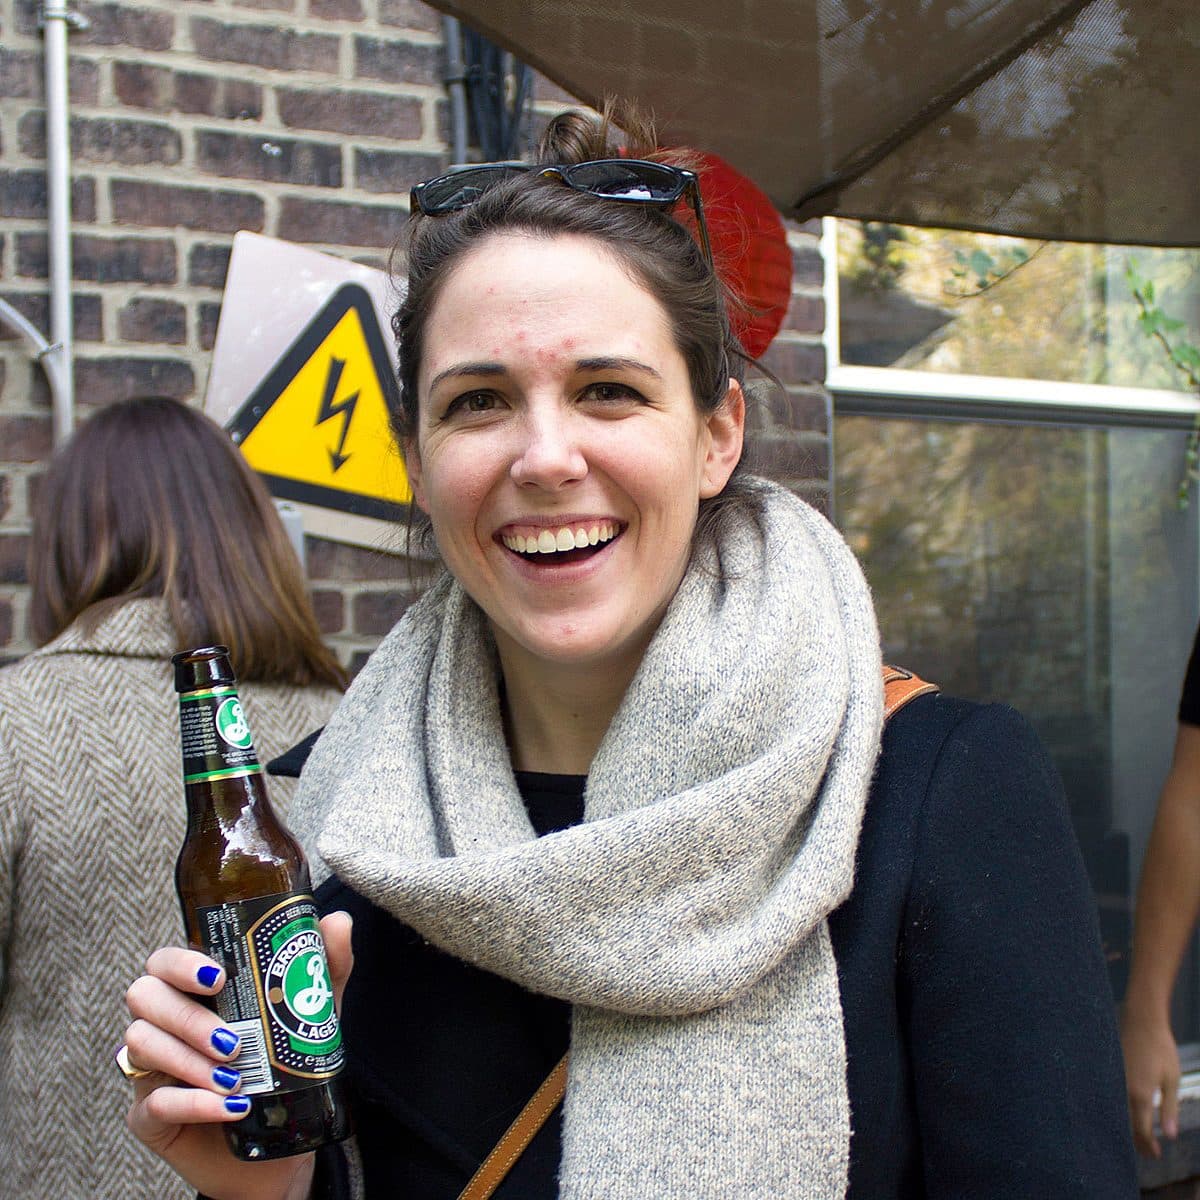 A woman smiles while holding a bottle of beer. She's wearing a dark jacket and a beige scarf. In the background, there are other people and a sign with a lightning bolt. The setting appears to be outdoors.